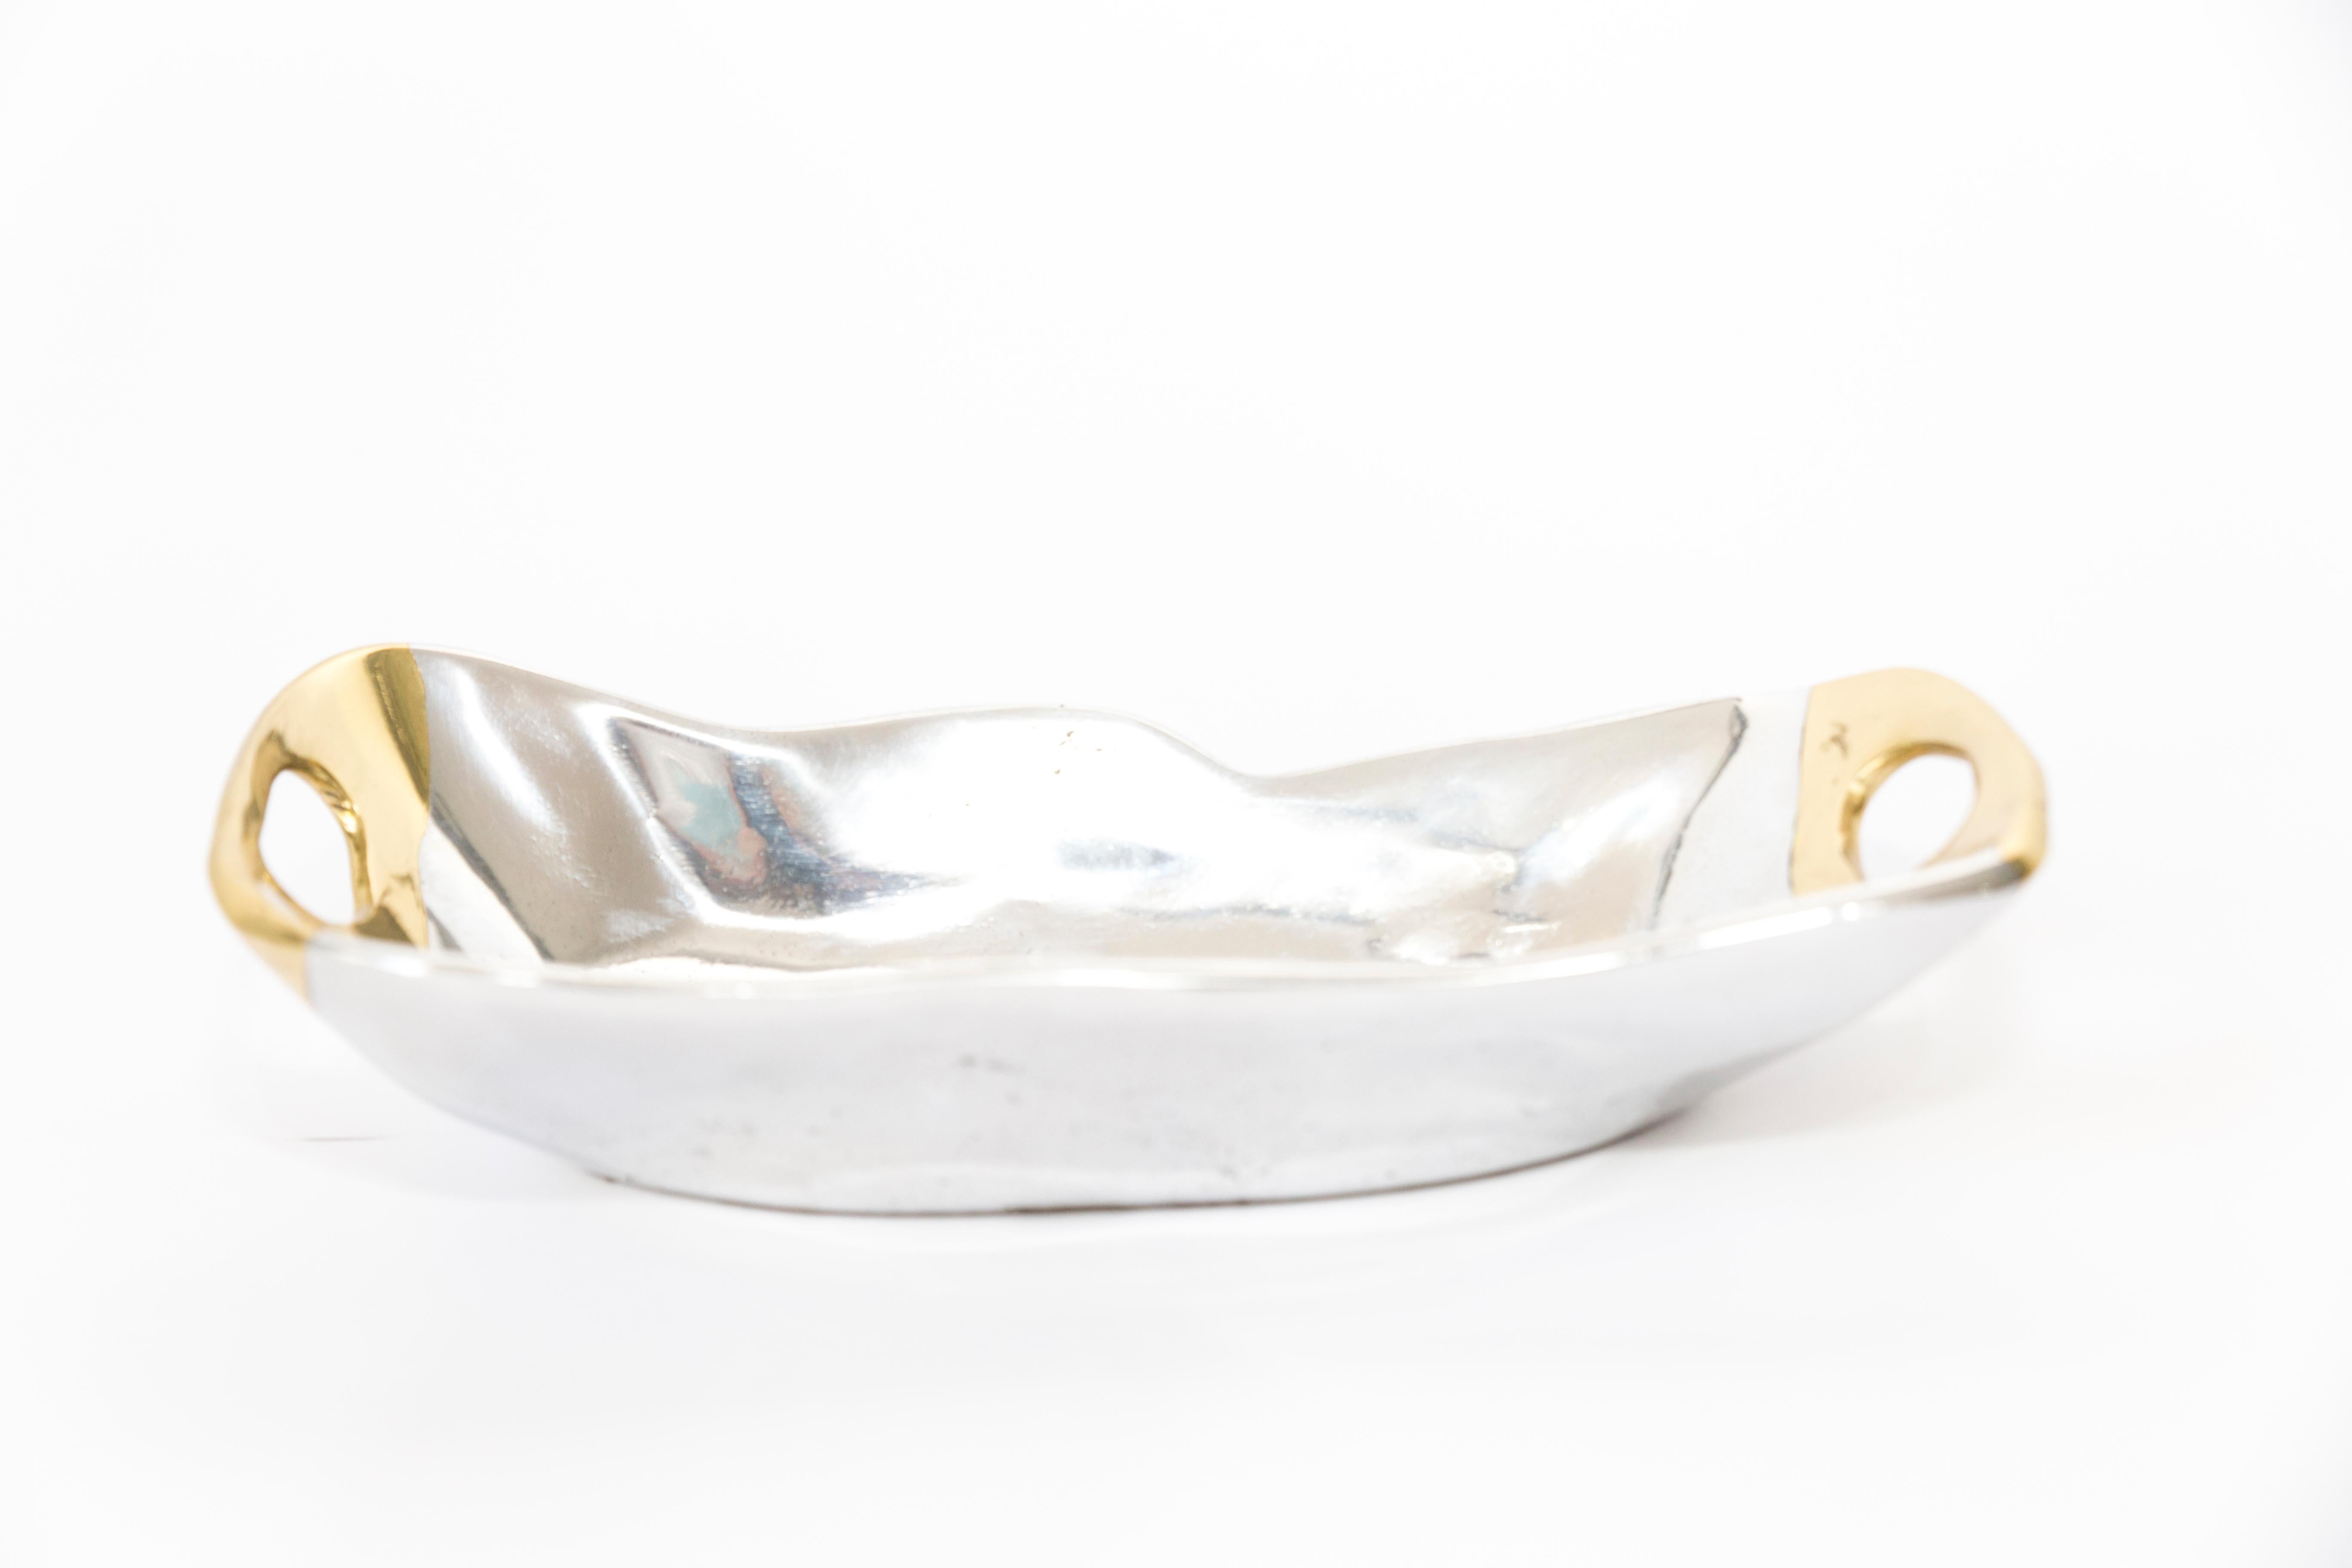 Small Oval Bowl A021 Decorative Center Piece Silver and Gold Coloured Cast Metal In New Condition For Sale In Benahavis, AN